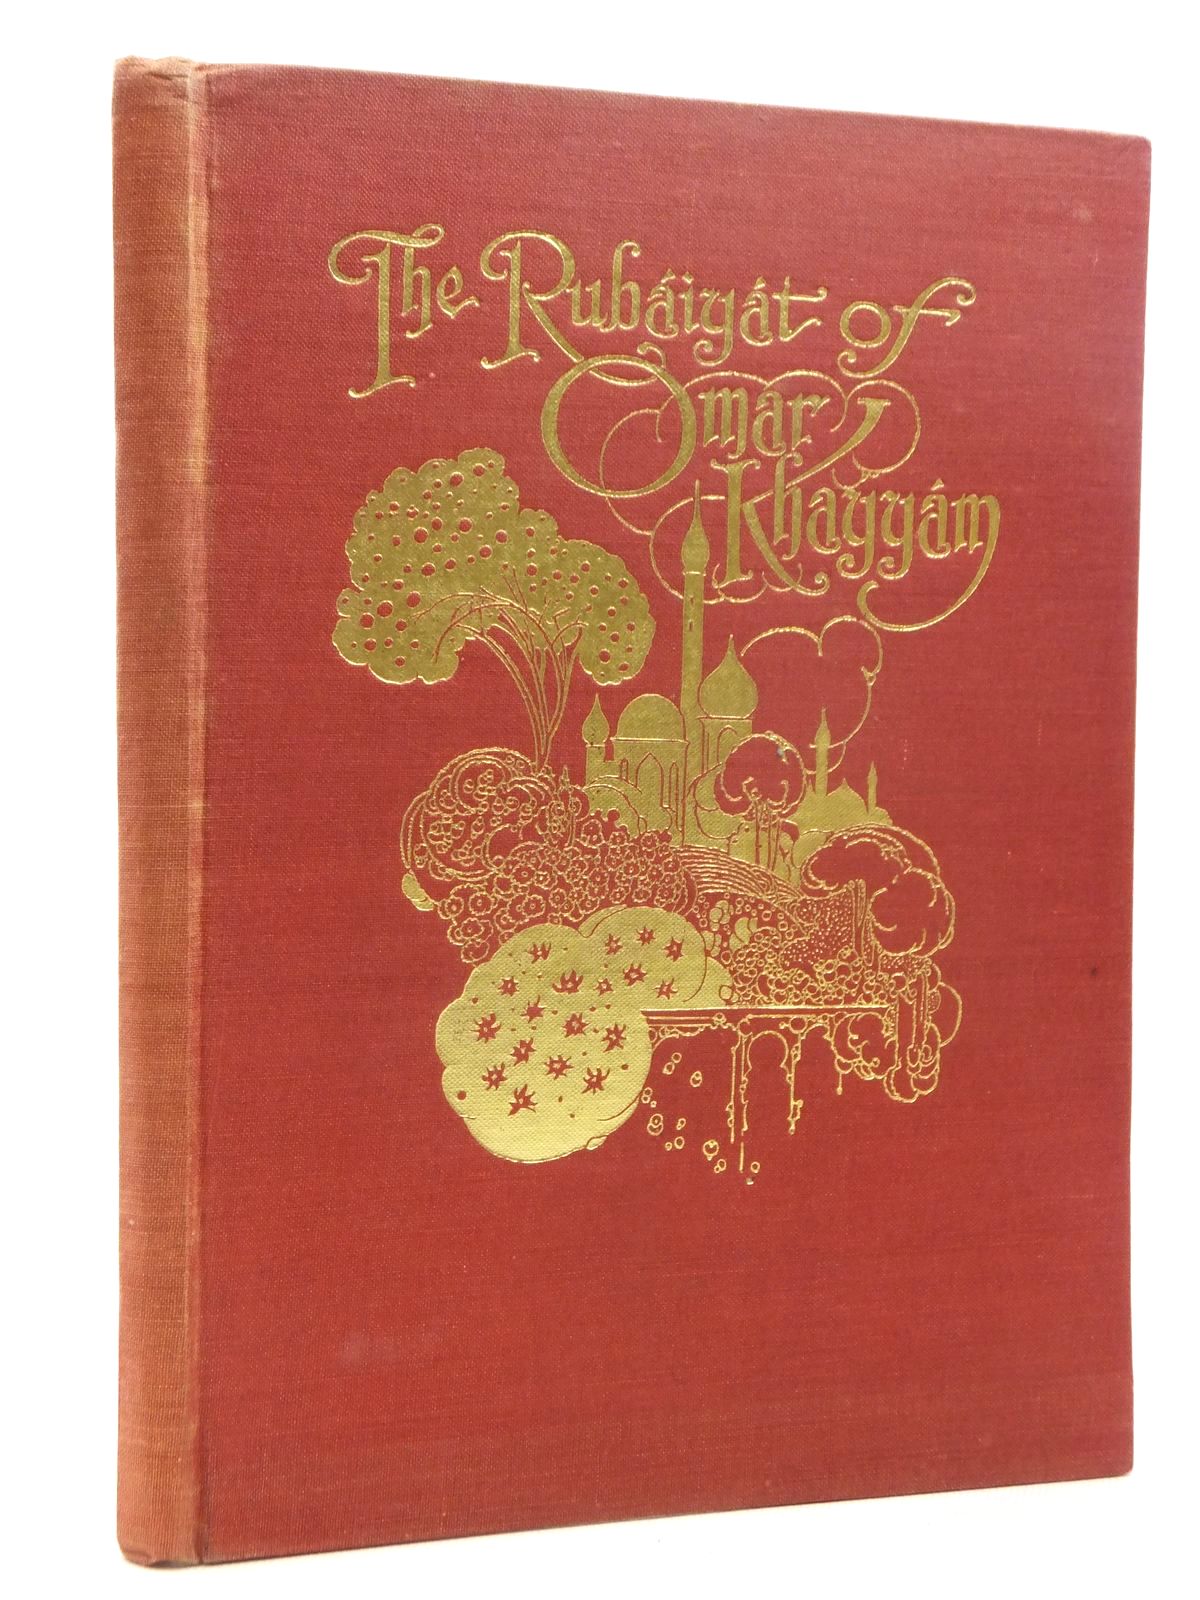 Photo of THE RUBAIYAT OF OMAR KHAYYAM written by Khayyam, Omar Fitzgerald, Edward Housman, Laurence illustrated by Robinson, Charles published by Collins Clear-Type Press (STOCK CODE: 1316945)  for sale by Stella & Rose's Books